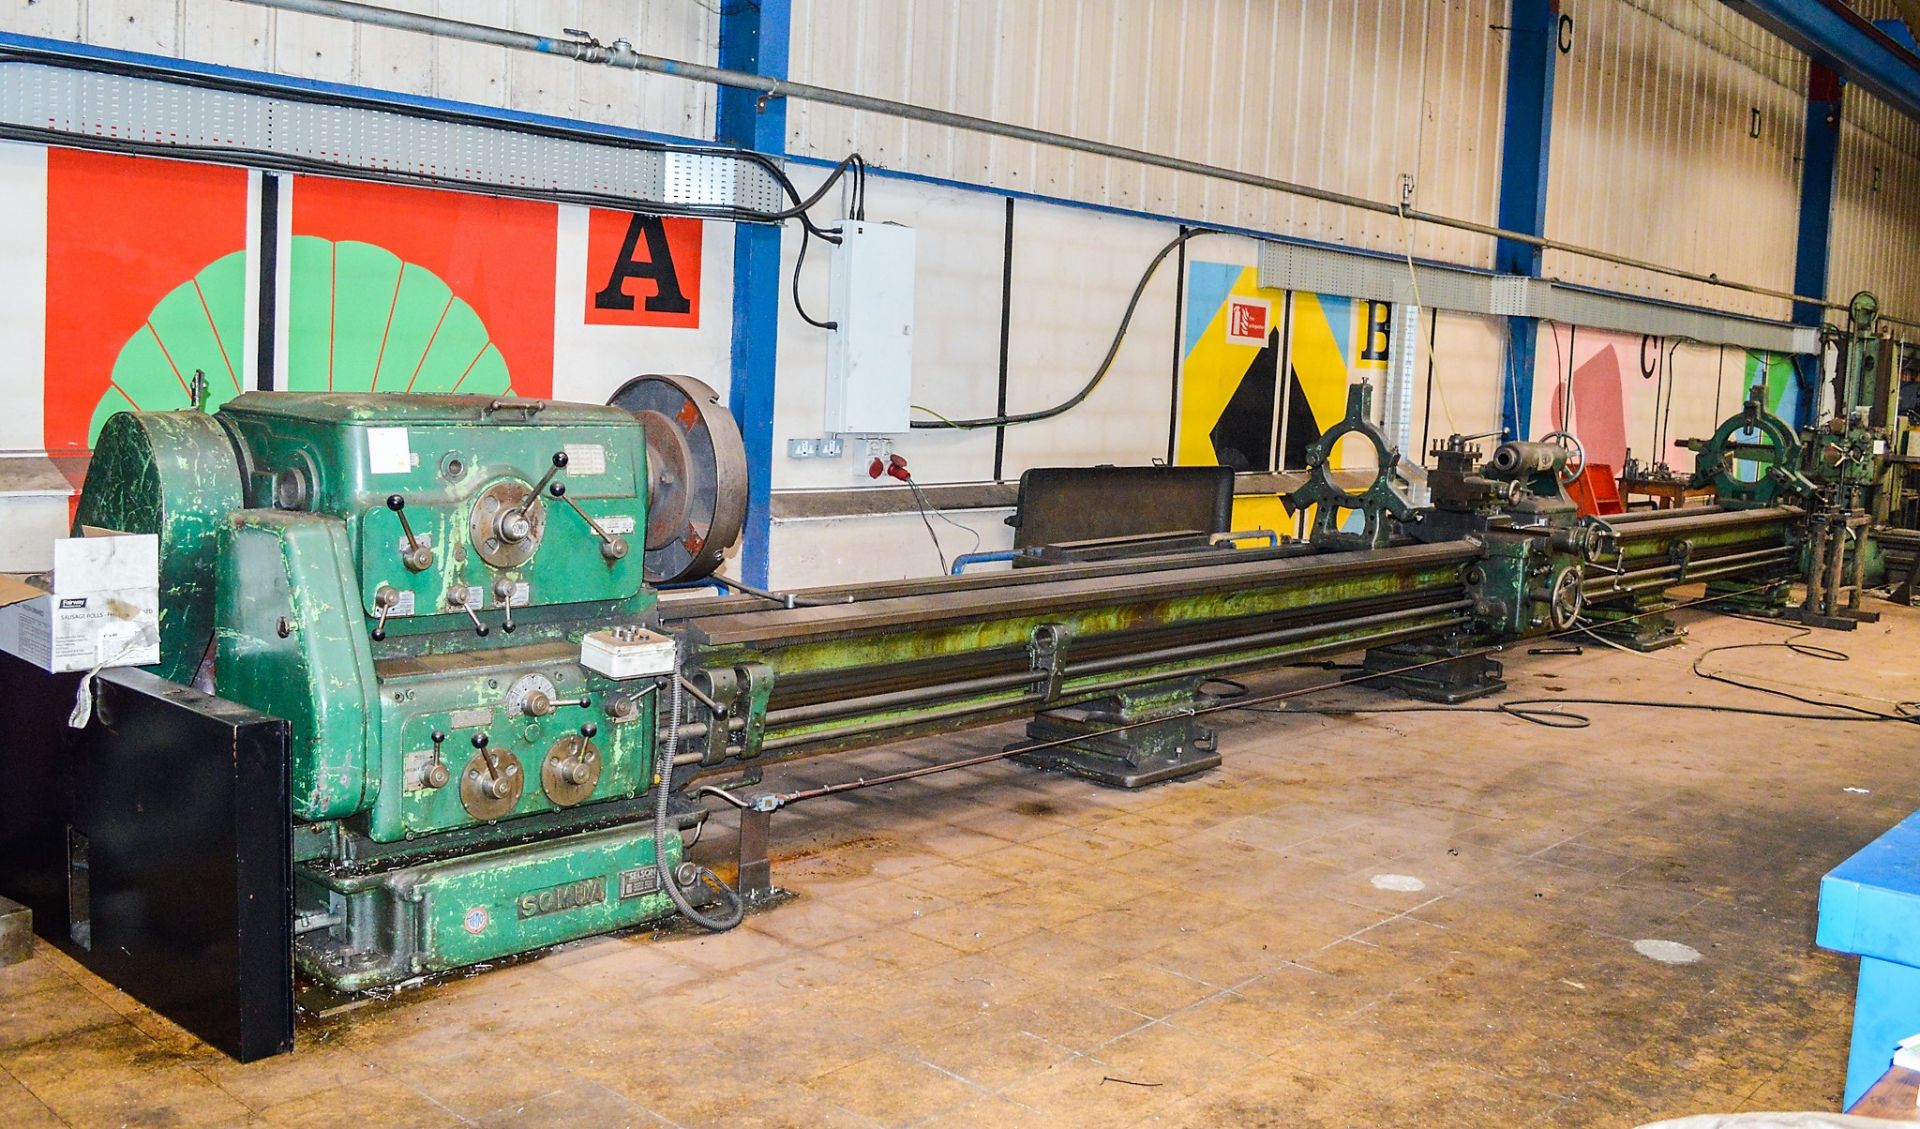 Somua straight bed centre lathe 15 inch swing over bed, 31 foot between centres c/w 3 - fixed